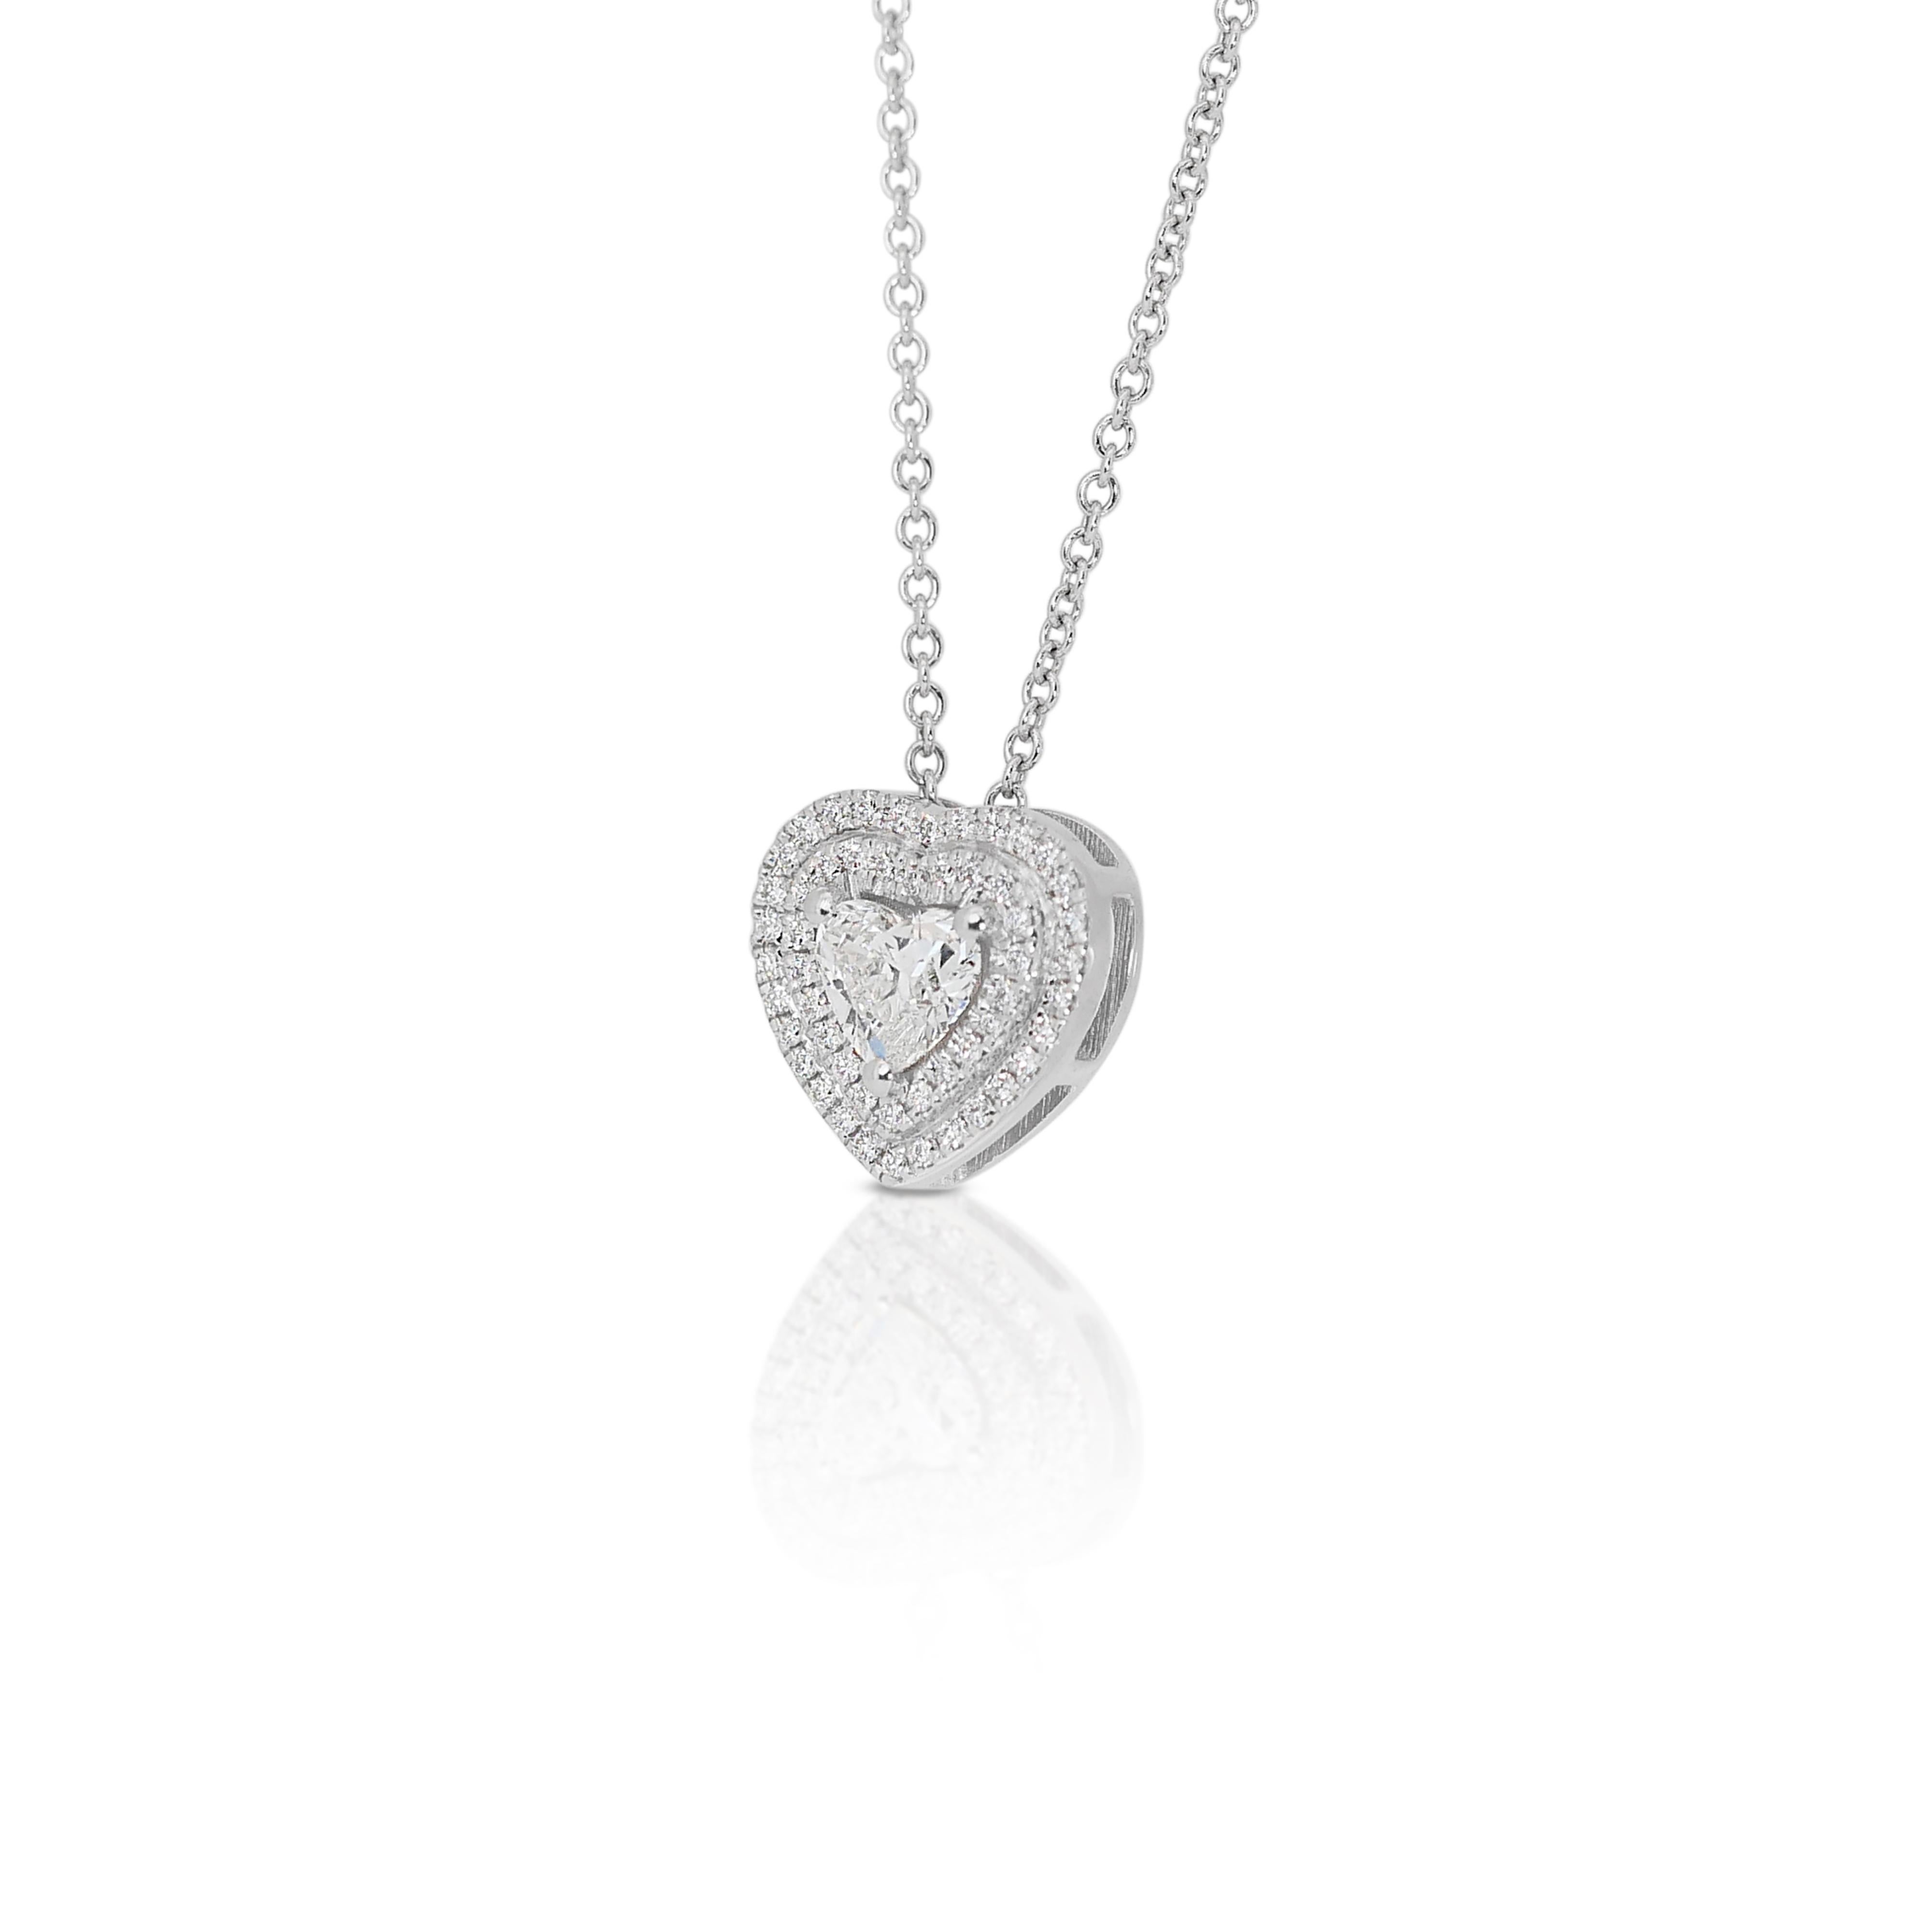 Elegant 0.80ct Heart-Shaped Diamond Halo Necklace in 18k White Gold - GIA Certif In New Condition For Sale In רמת גן, IL